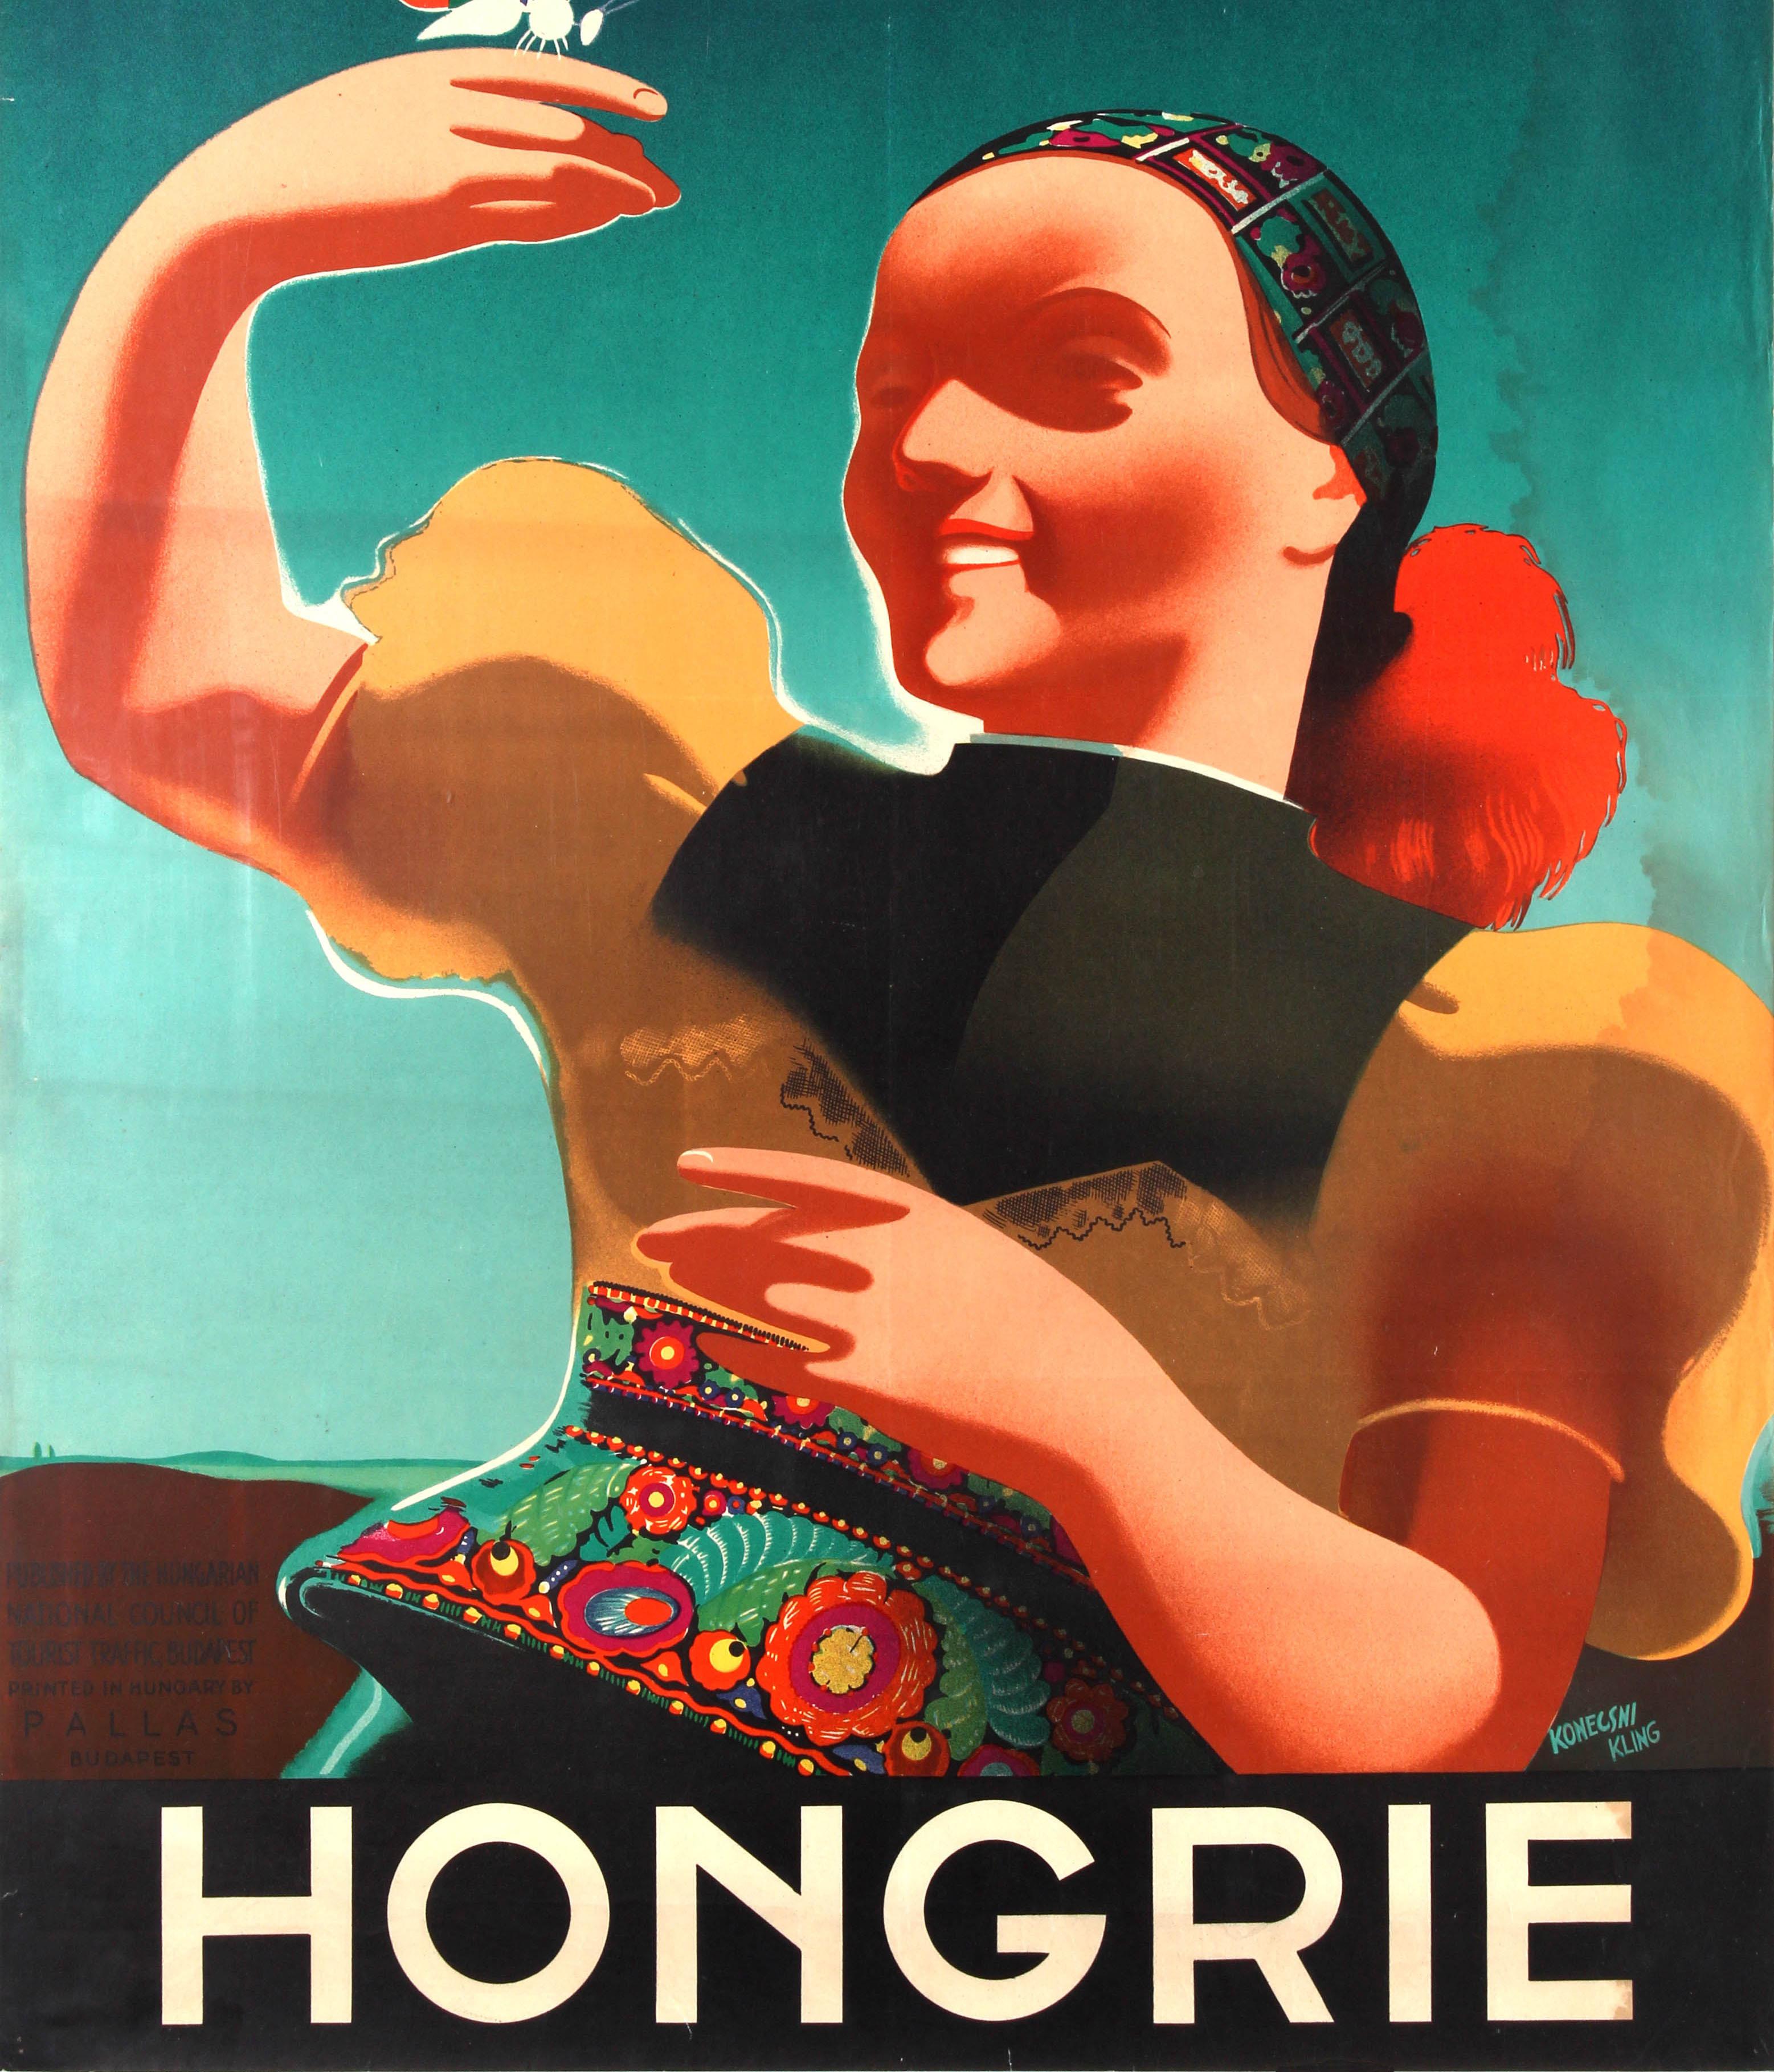 Original vintage travel poster for Hungary / Hongrie featuring a great Art Deco illustration depicting a smiling lady in a traditional costume holding a butterfly with colourful flags on its wings against the sky background. Artwork by the Hungarian